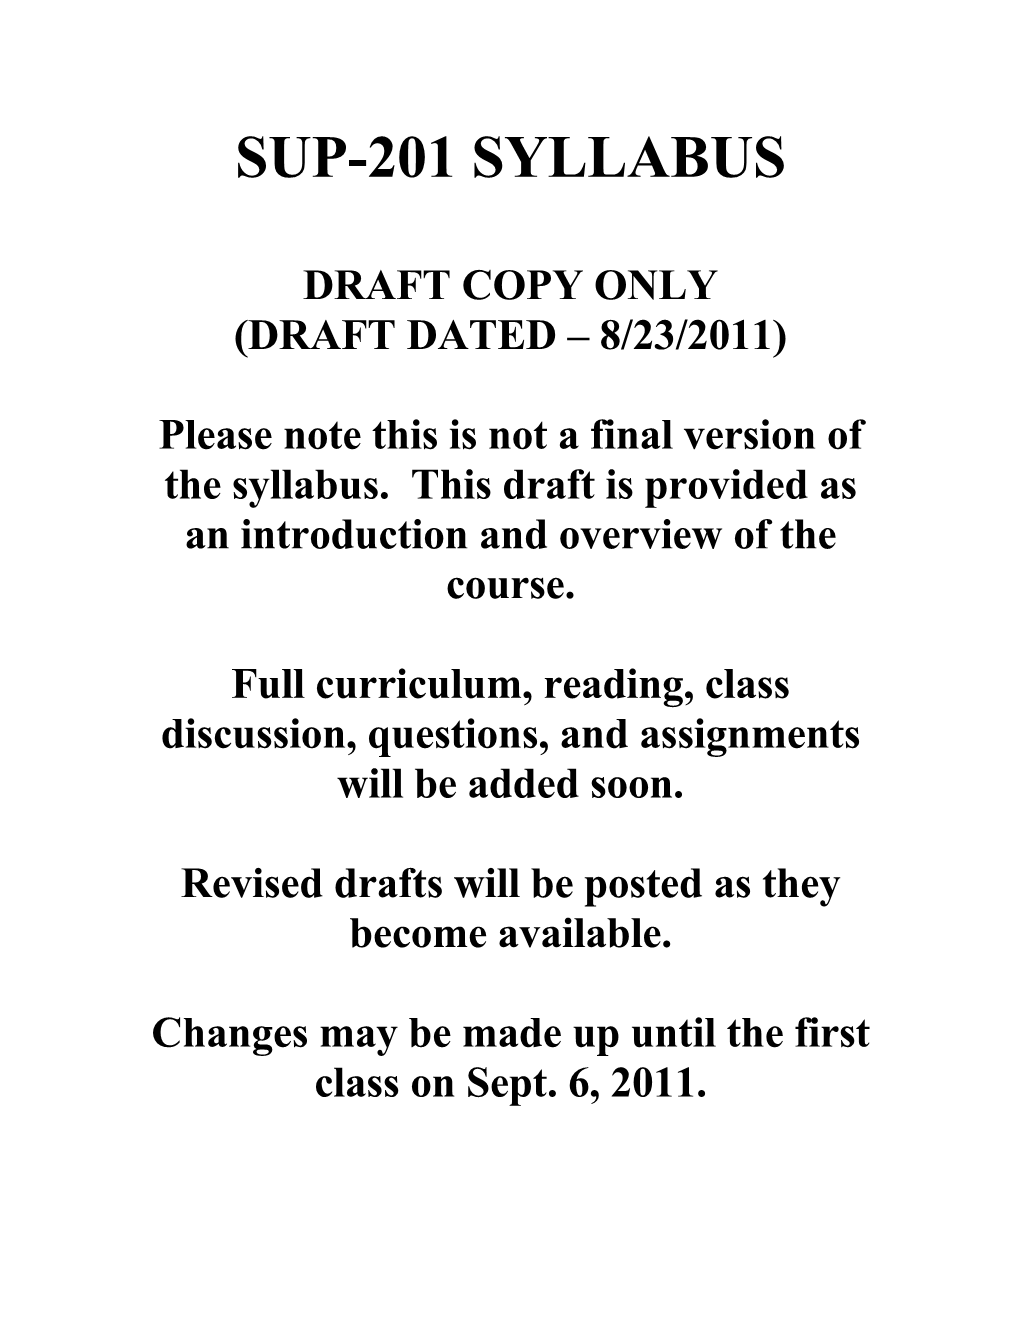 Full Curriculum, Reading, Class Discussion, Questions, and Assignments Will Be Added Soon